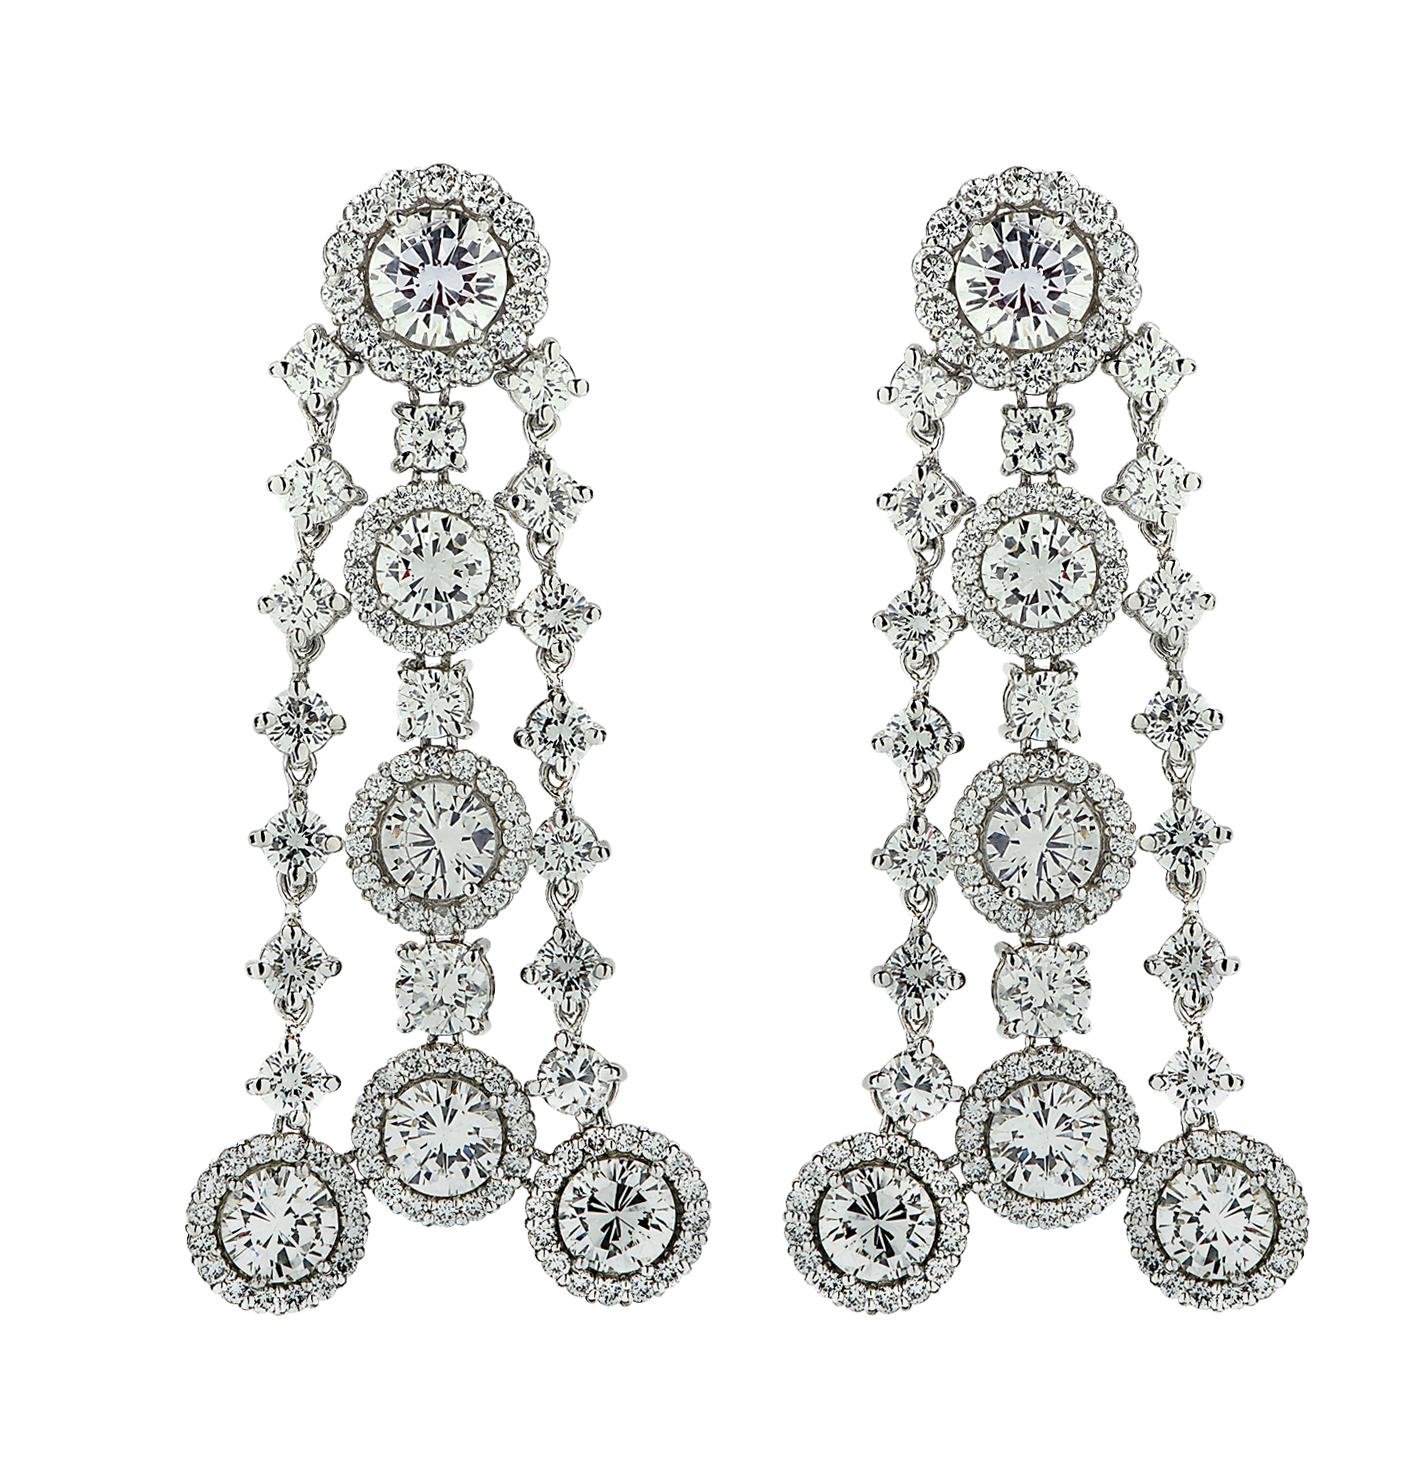 From The House of Vivid Diamonds, These striking pair of diamond dangle earrings are crafted in platinum and boast 15 carats of round brilliant cut diamonds, G-H Color, SI1-2 Clarity. The two largest diamonds weigh approximately 2.00 carats, the ten